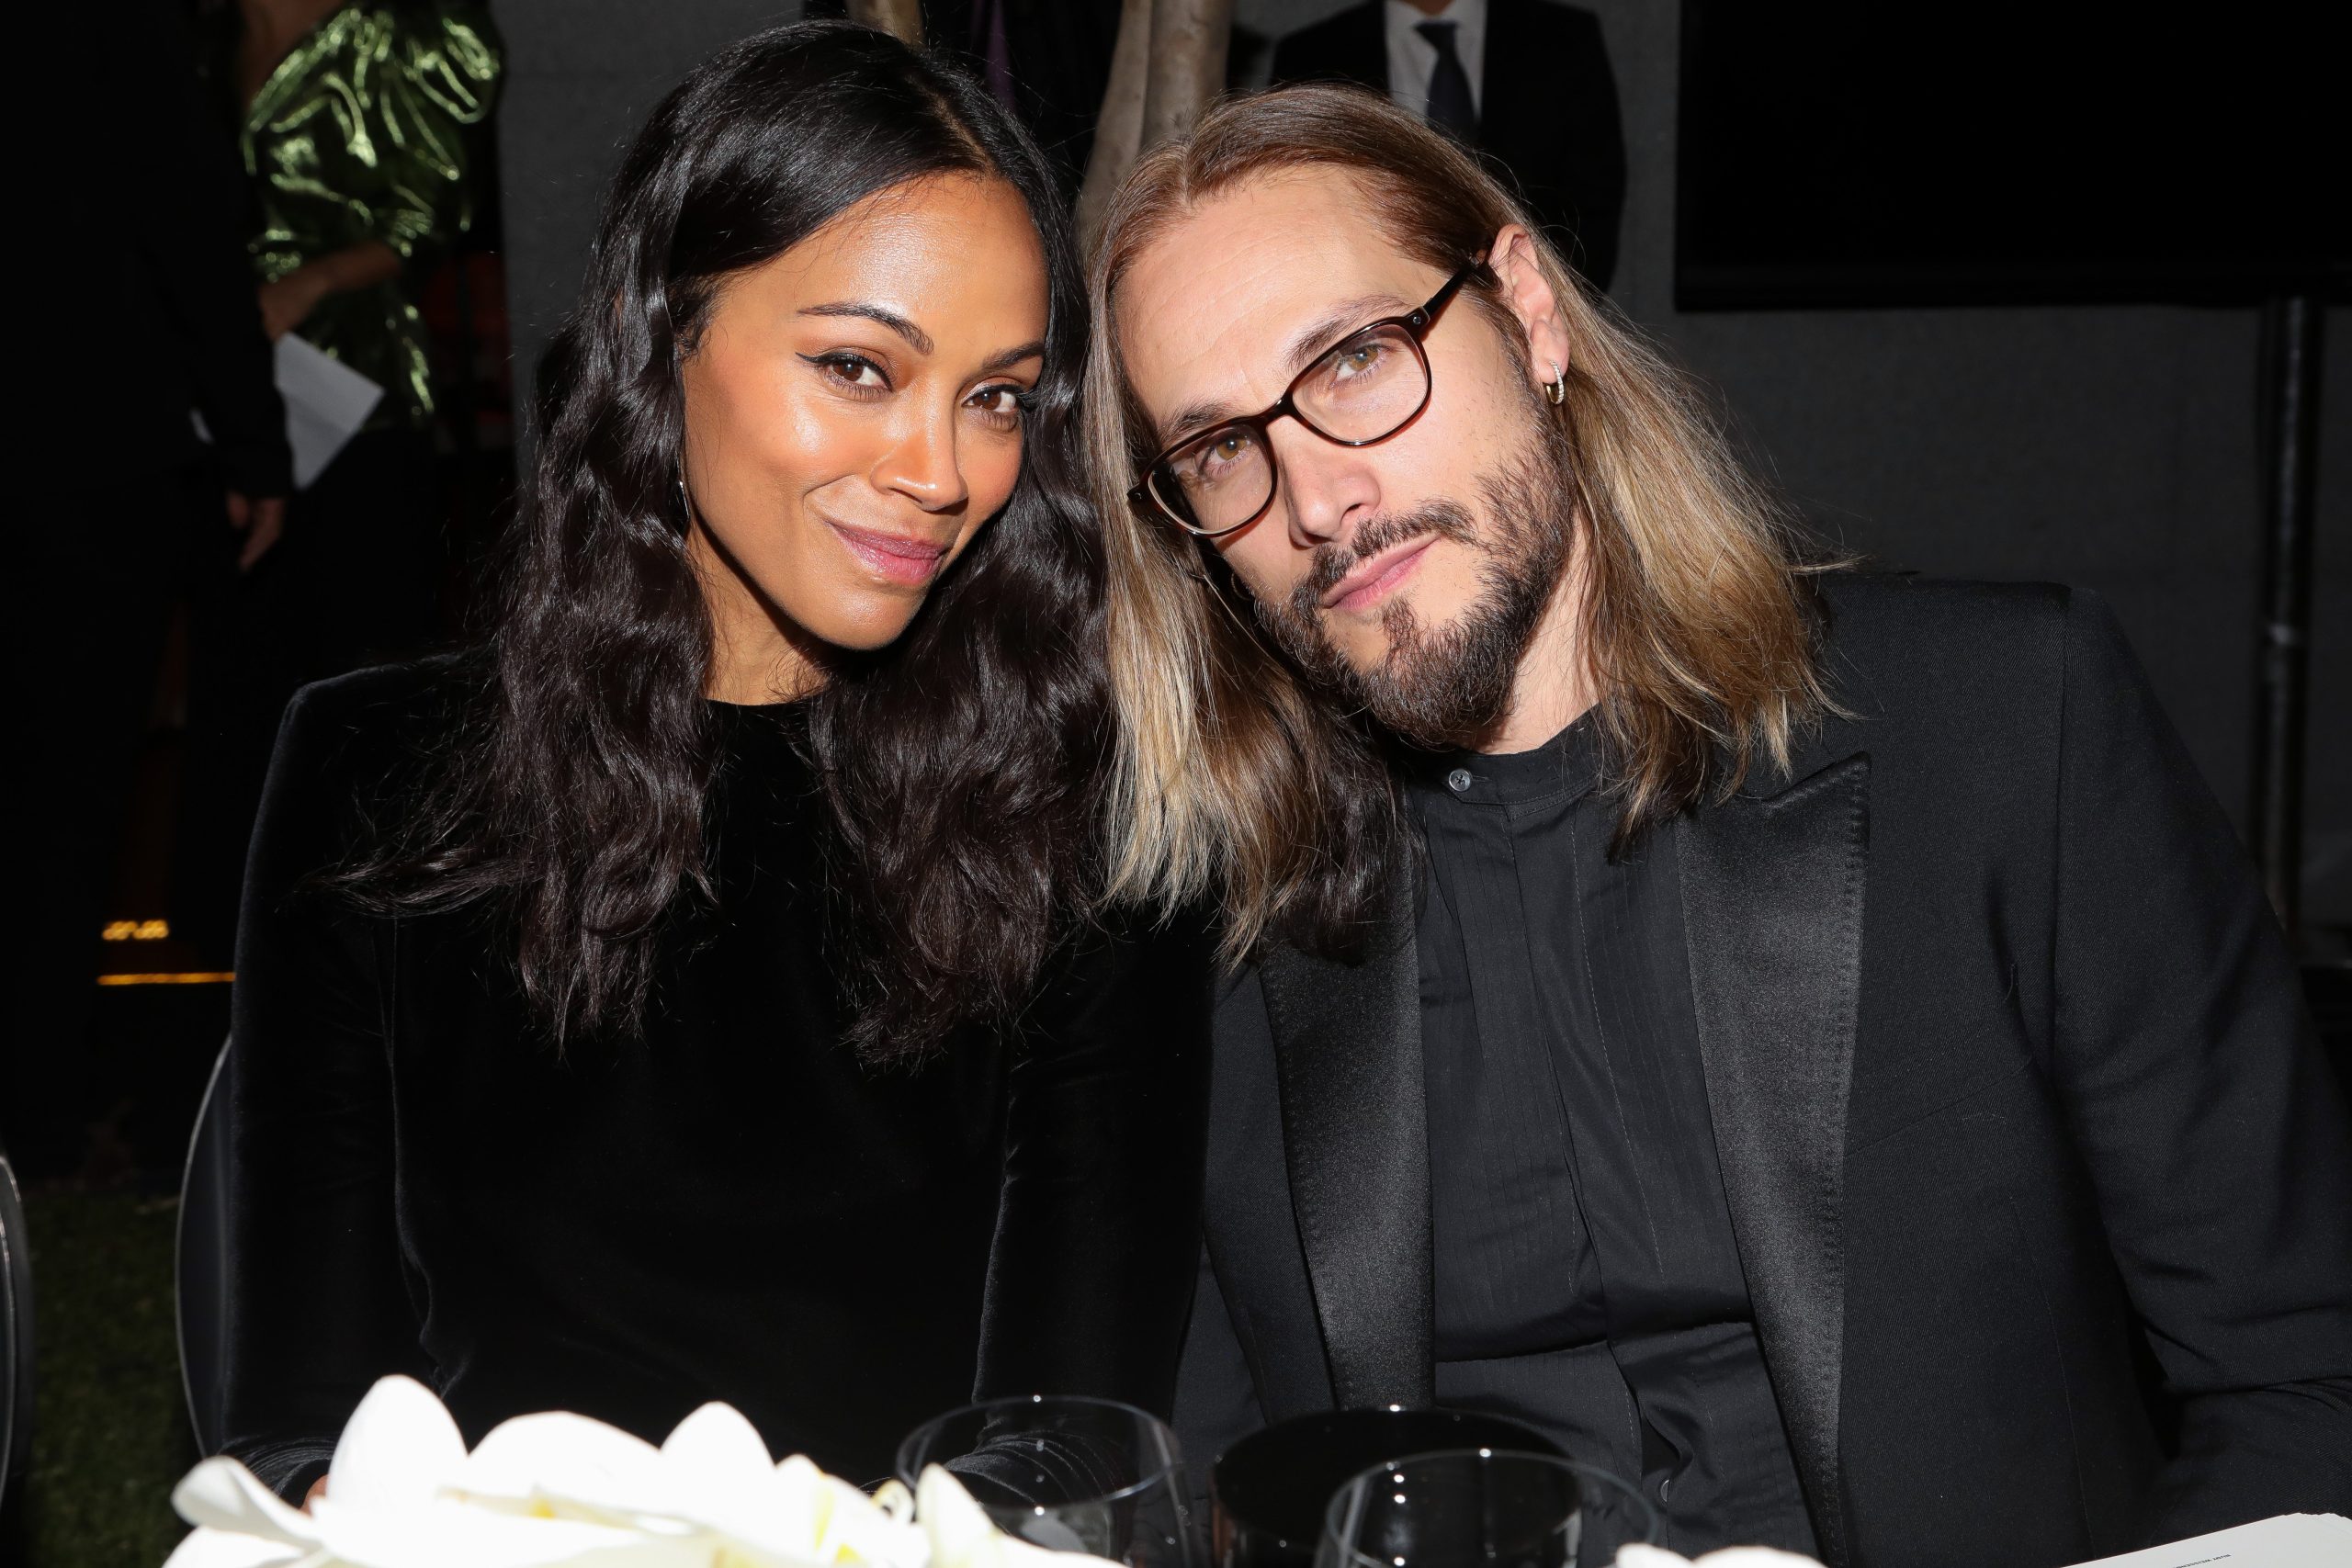 One of the popular actors who married non-famous people: Zoe Saldana and Marco Perego